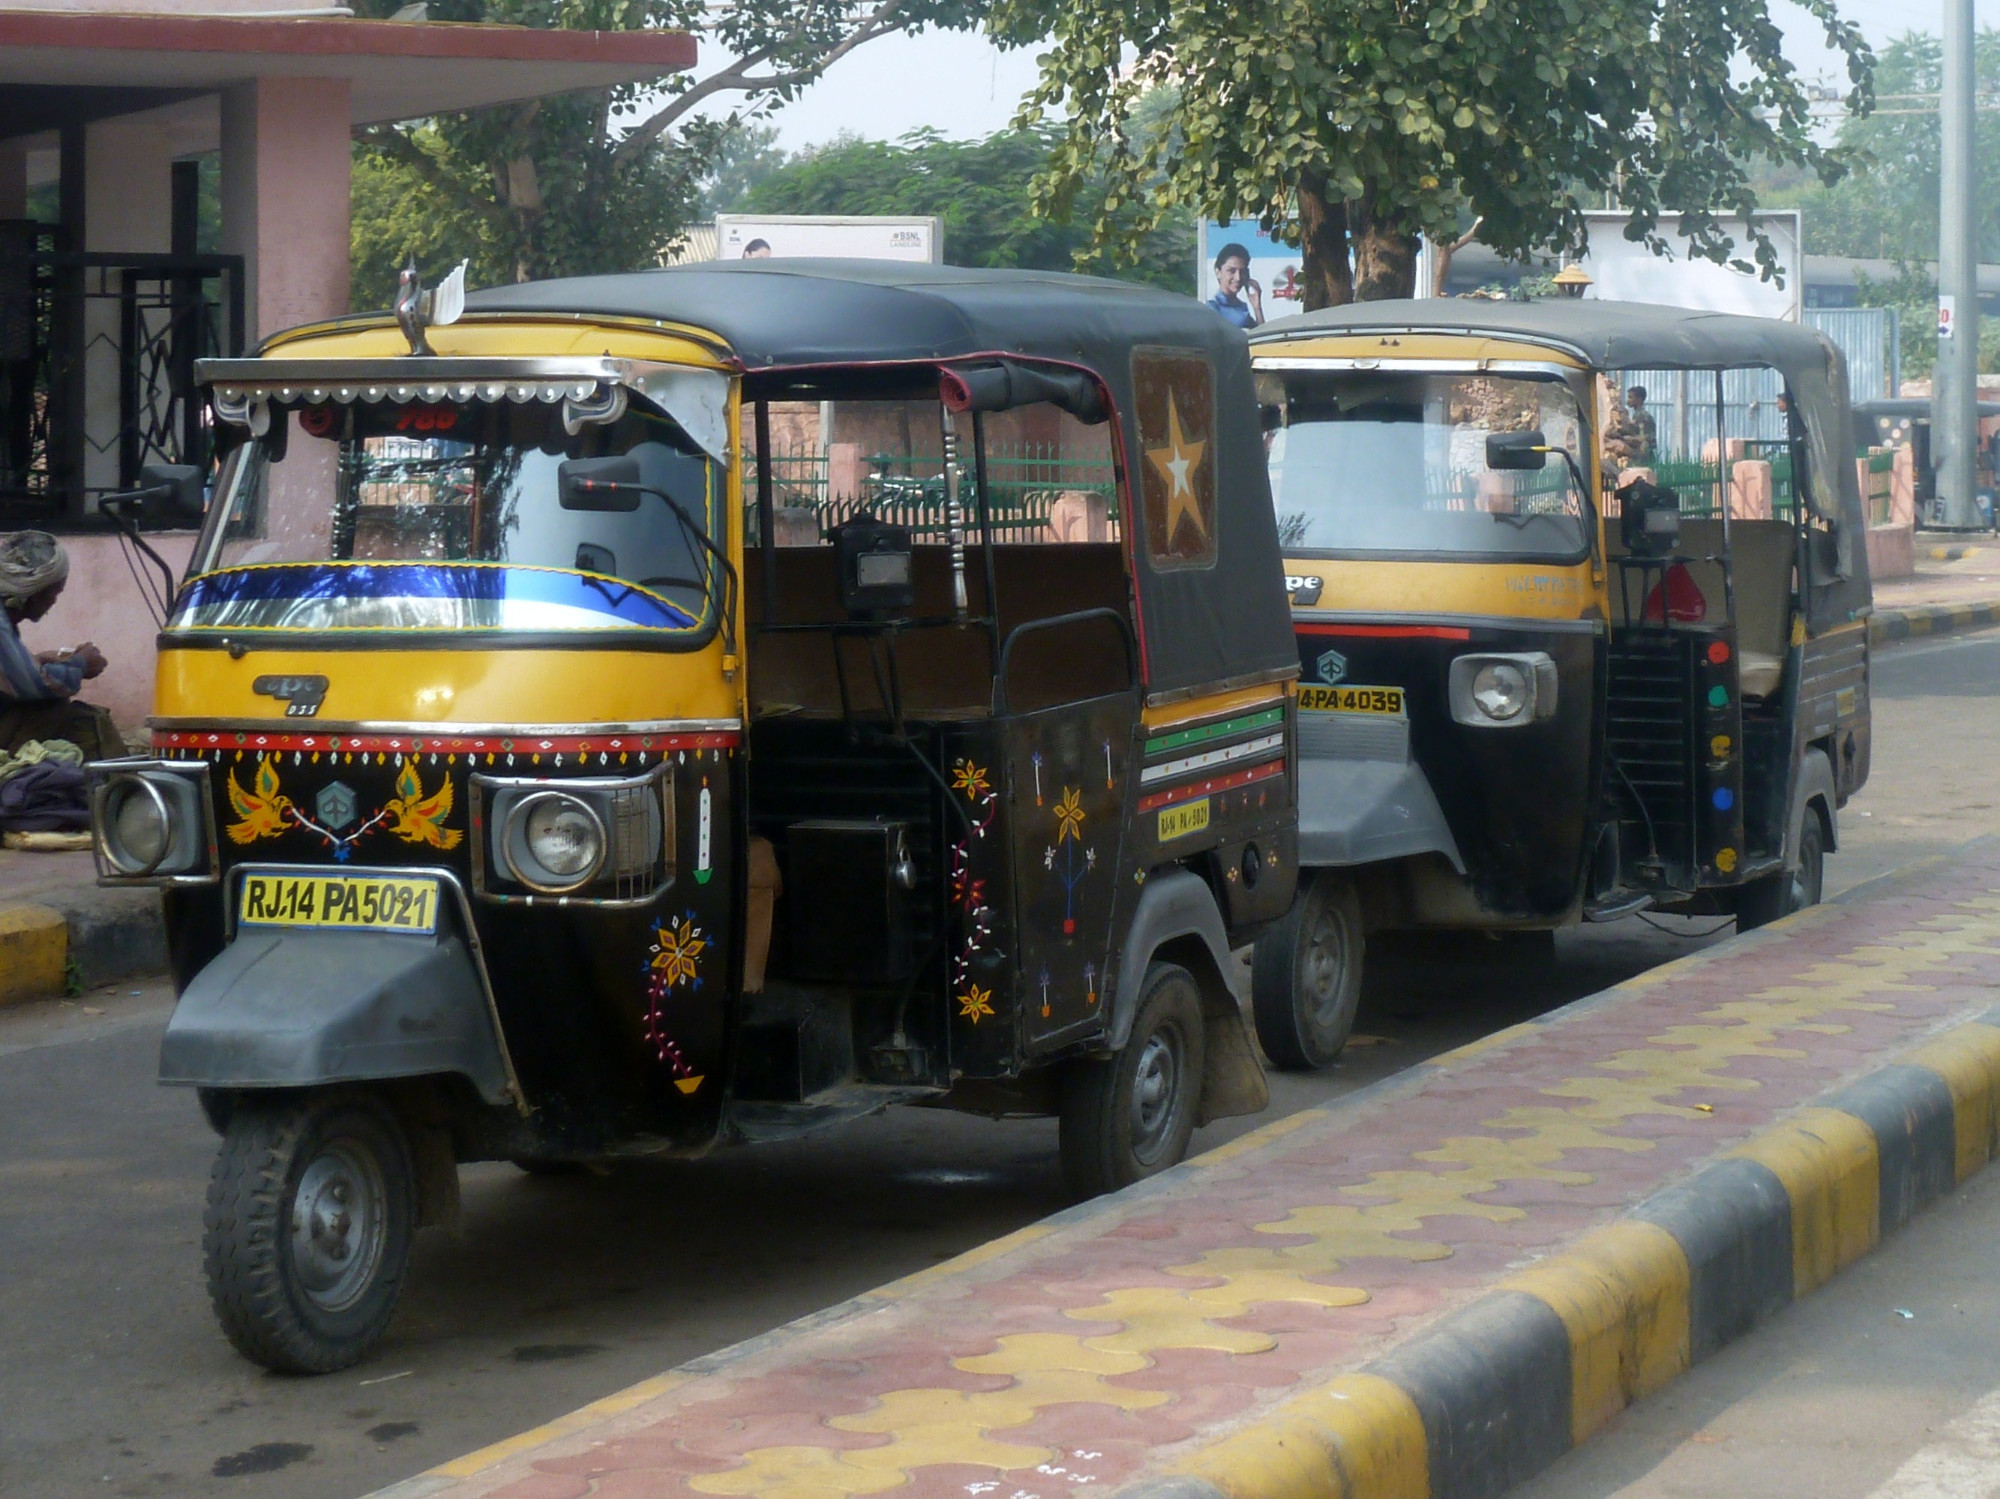 Taxi Rank Outside Train Station